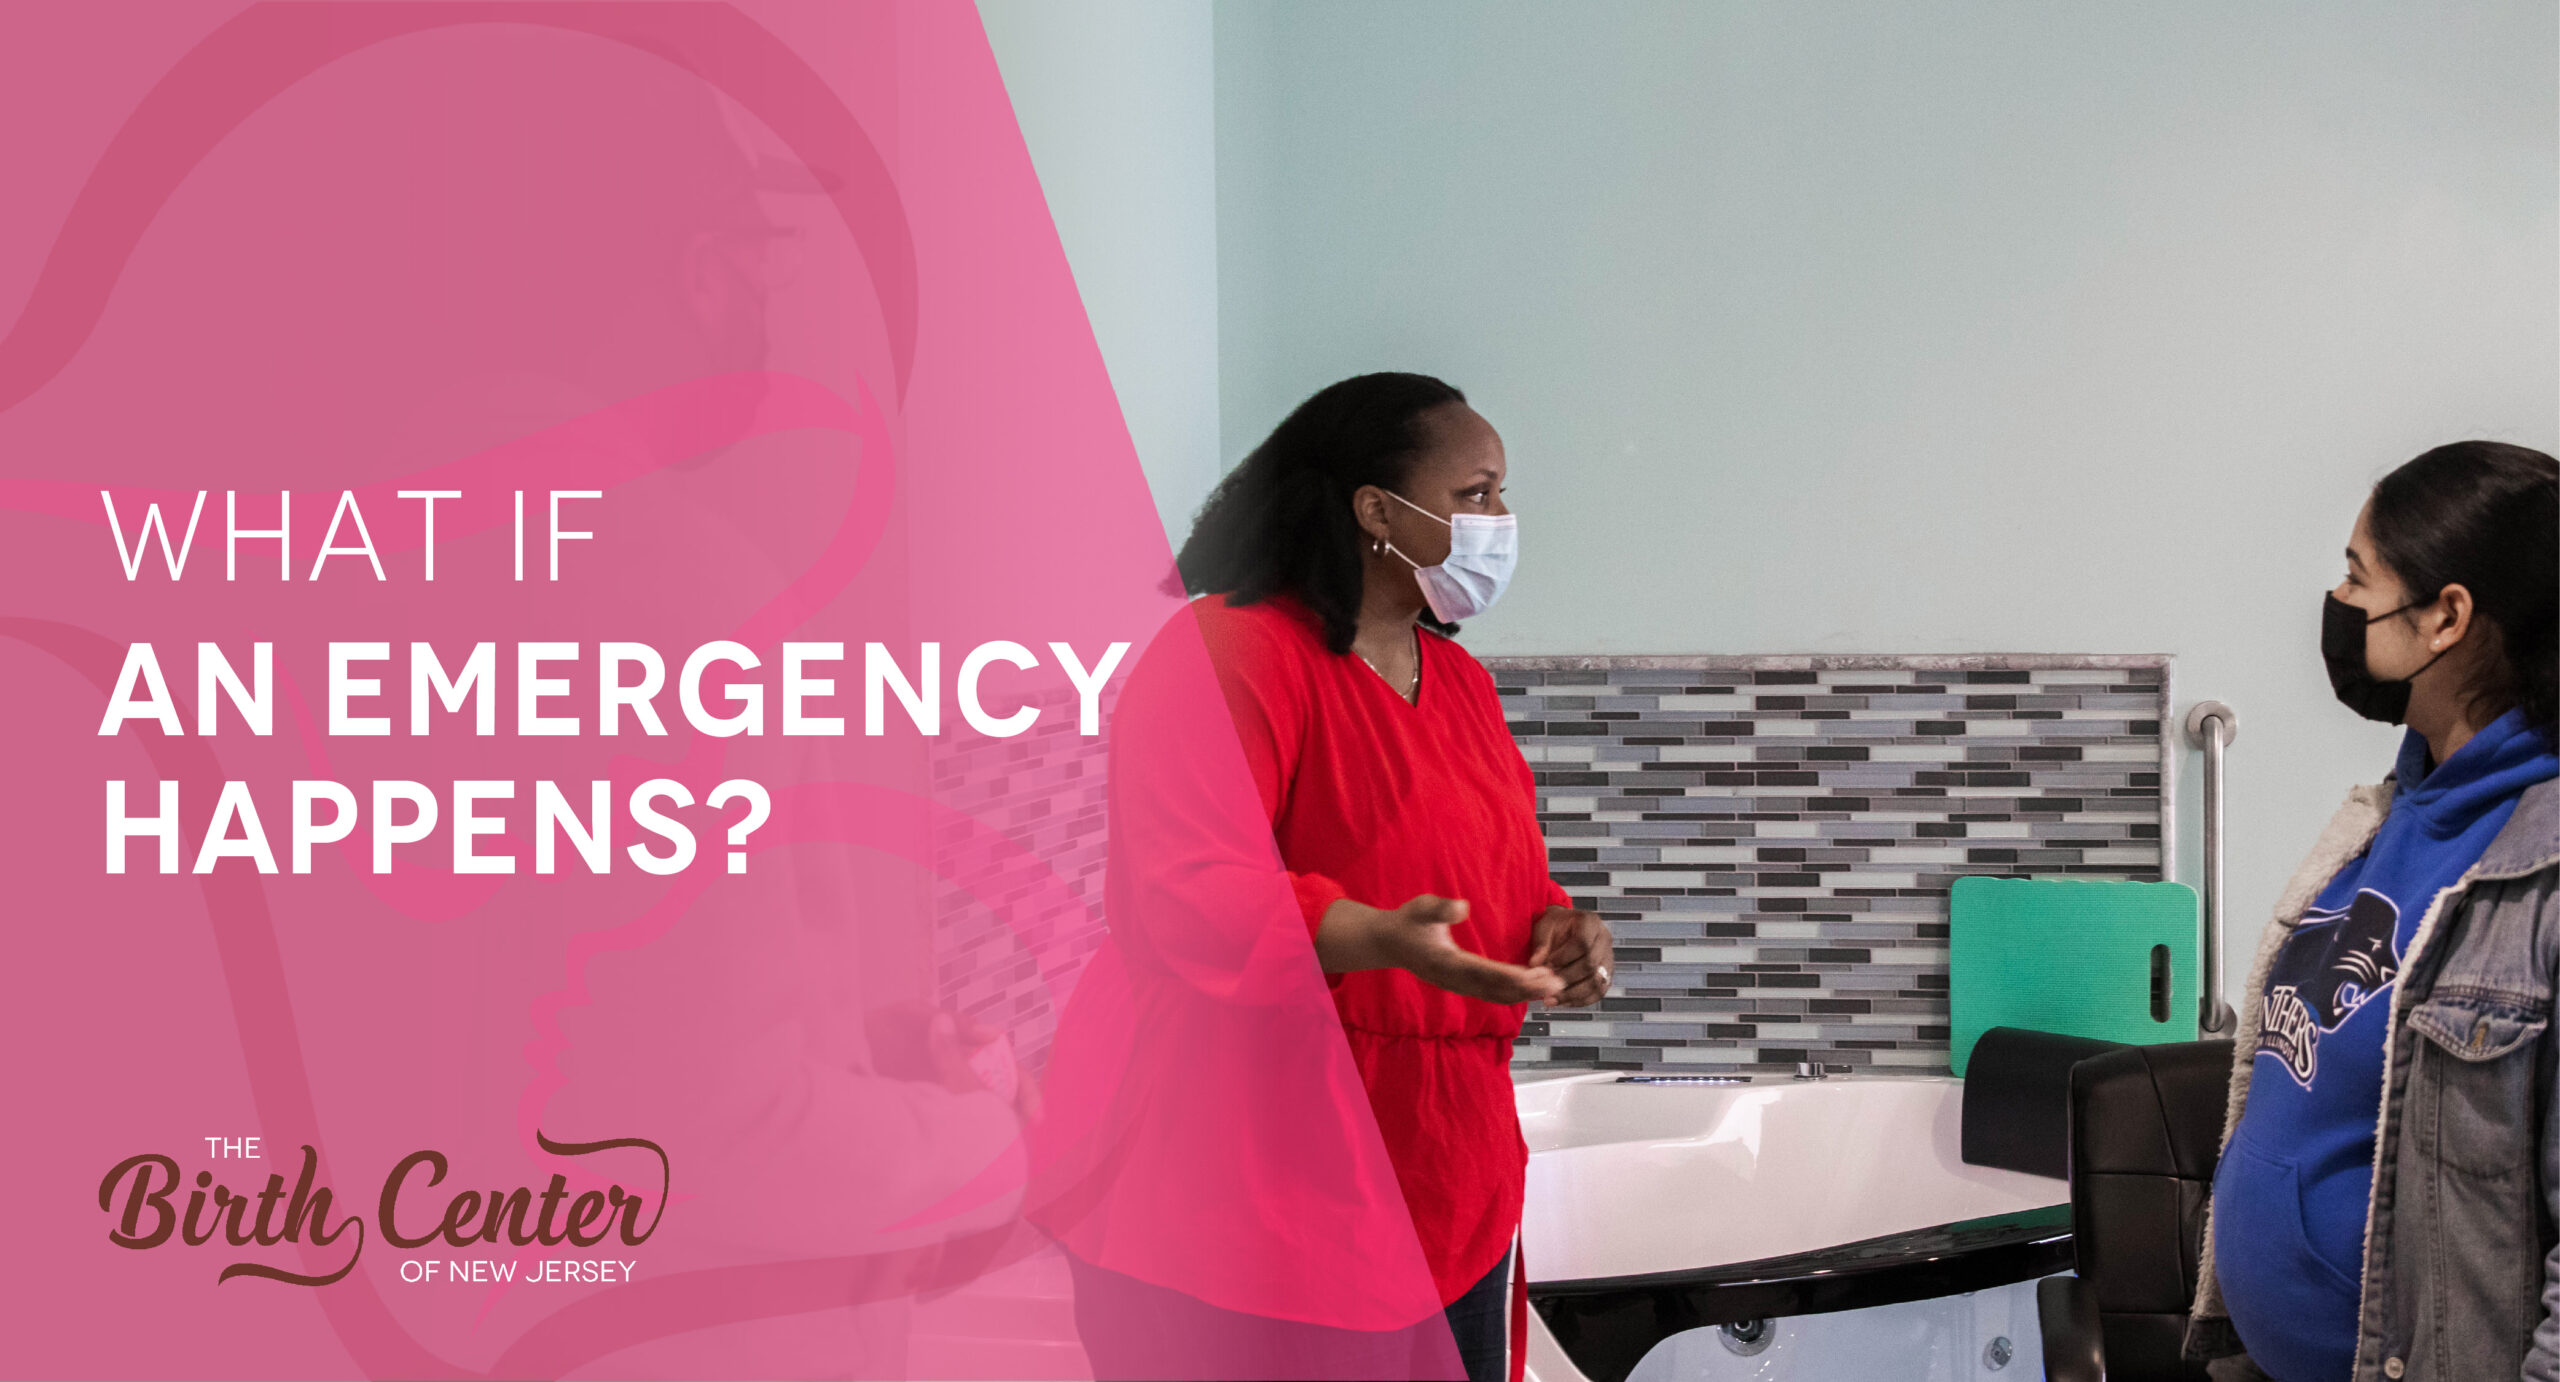 What if an Emergency Occurs At The Birth Center?